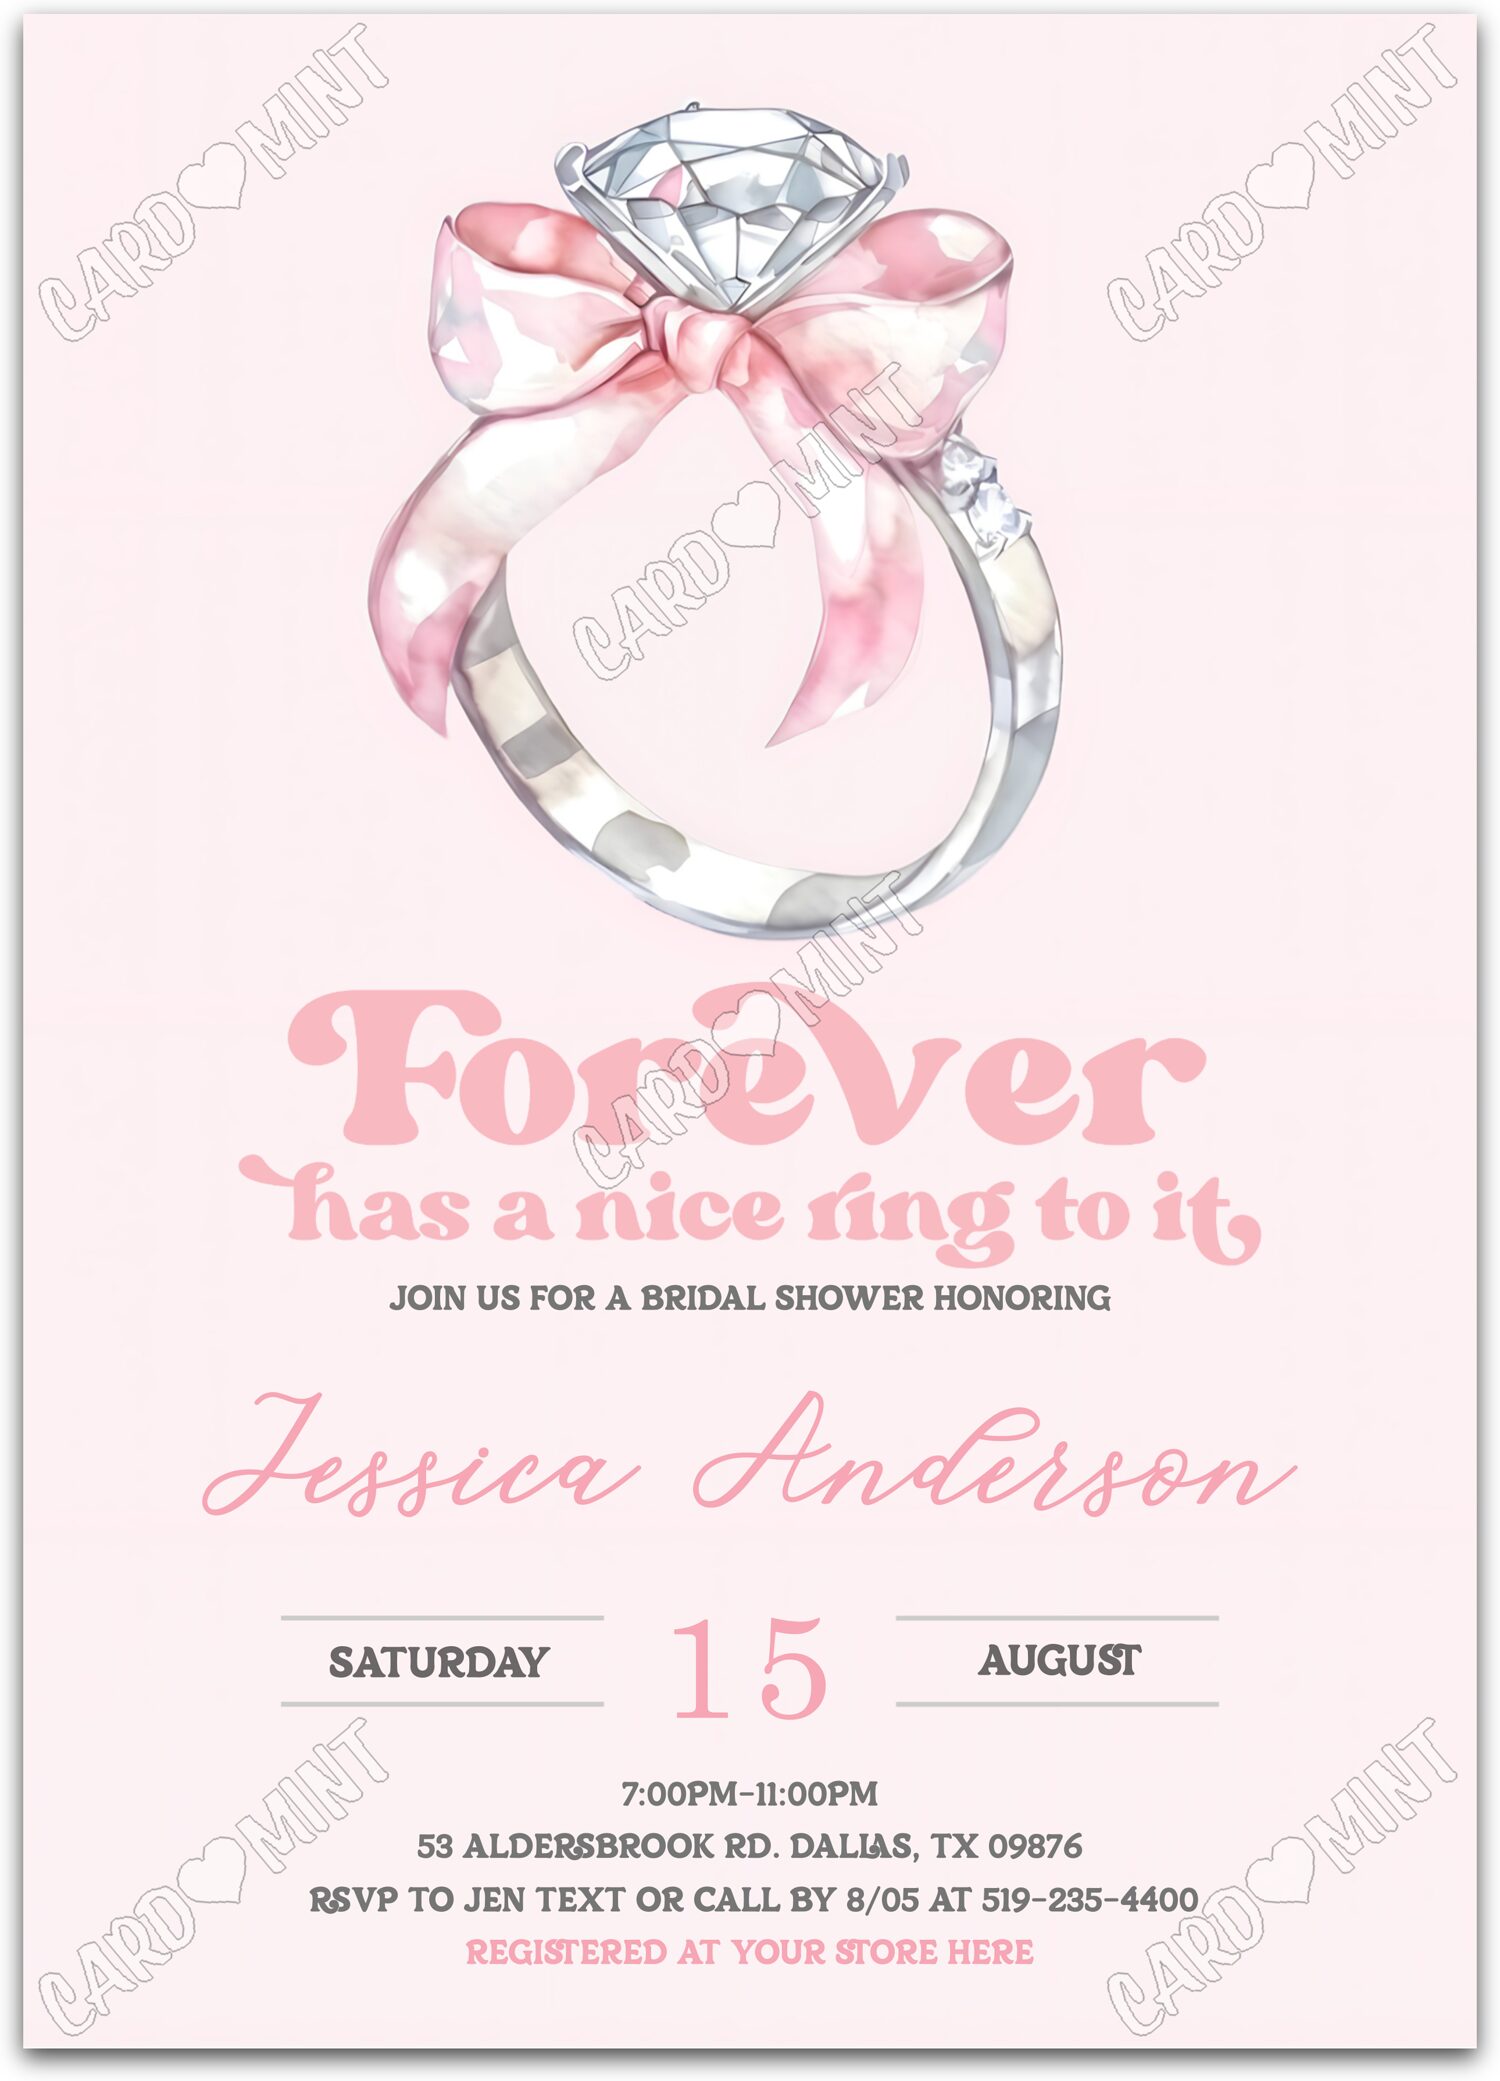 Editable Forever Together pink diamond ring with pink bow Bridal Shower 5"x7" Invitation EV1312